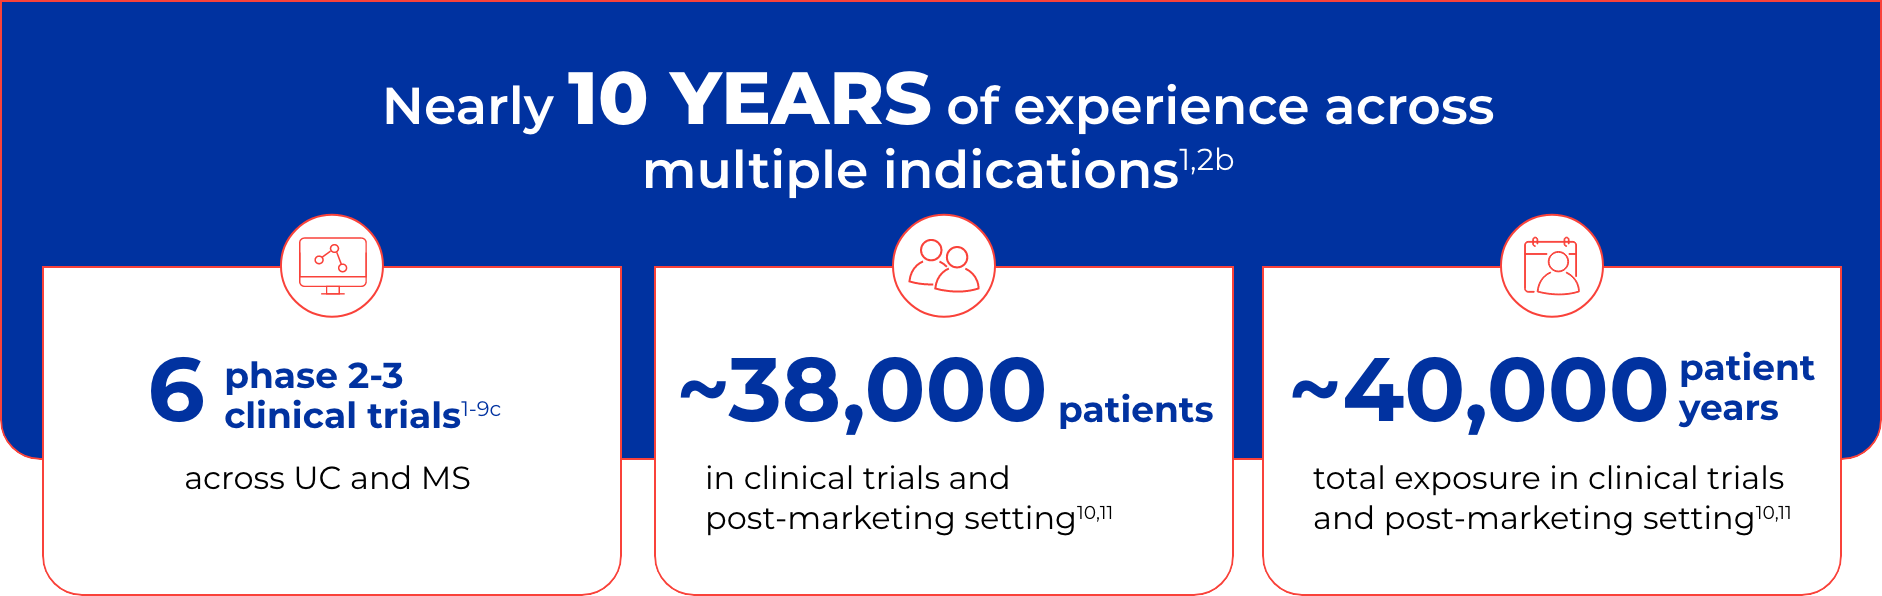 6 phase 2-3 clinical trials across UC and MS, ~38,000 patients in clinical trials and post marketing setting, and ~40,000 patient years total exposure in clinical trials and most marketing setting